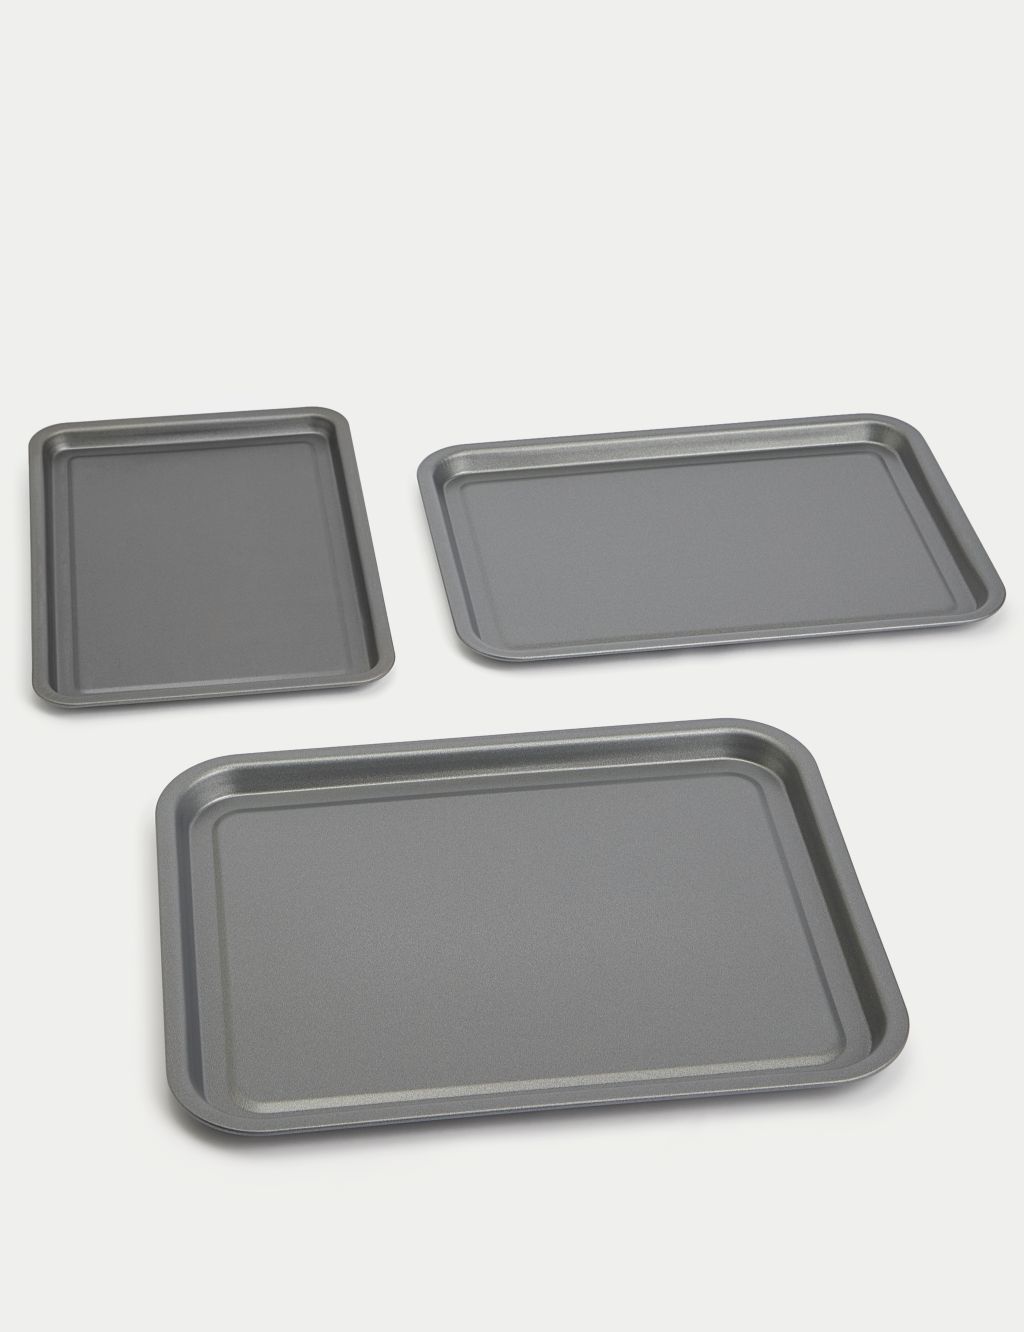 3 Piece Carbon Steel Oven Trays